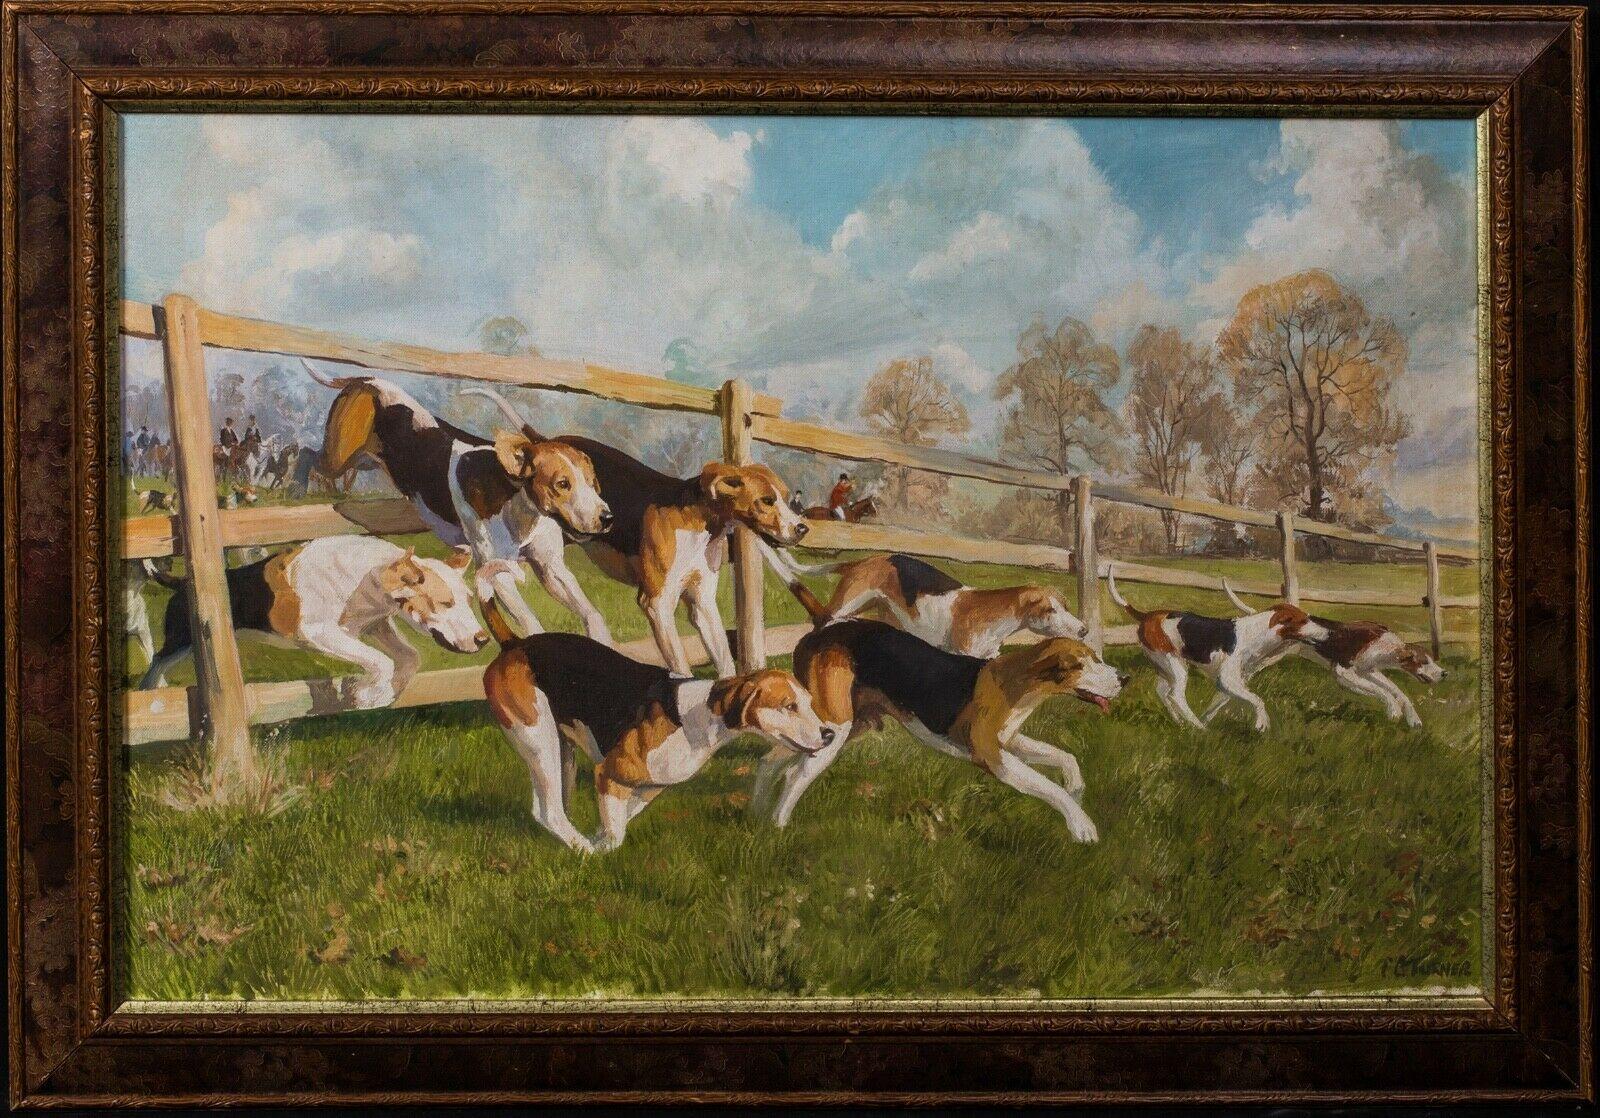 Hounds In Pursuit, 20th Century

by Charles Clifford Turner

Fine large 20th century English fox hunting scene with the foxhounds in pursuits of the game, oil on canvas by Charles Clifford Turner. Excellent quality and condition, signed and